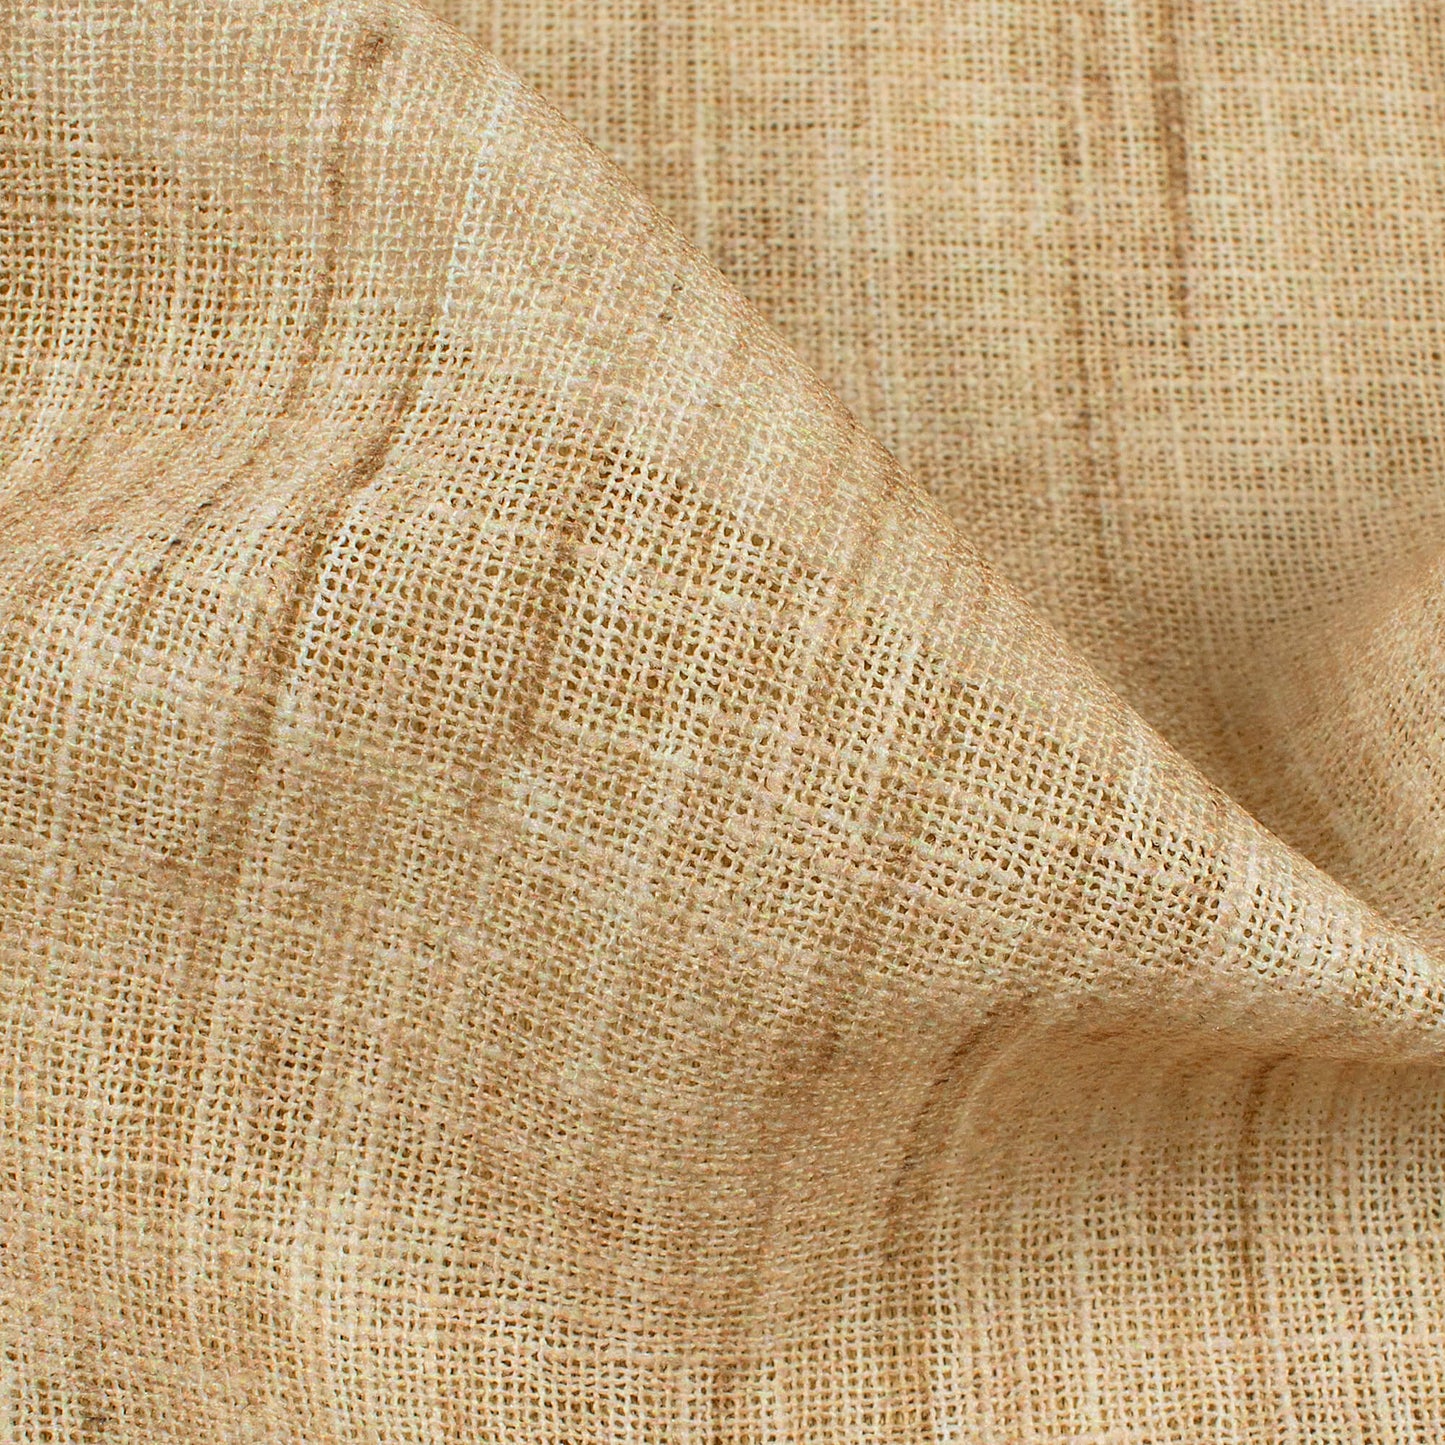 Camel Brown Textured Premium Sheer Fabric (Width 54 Inches)